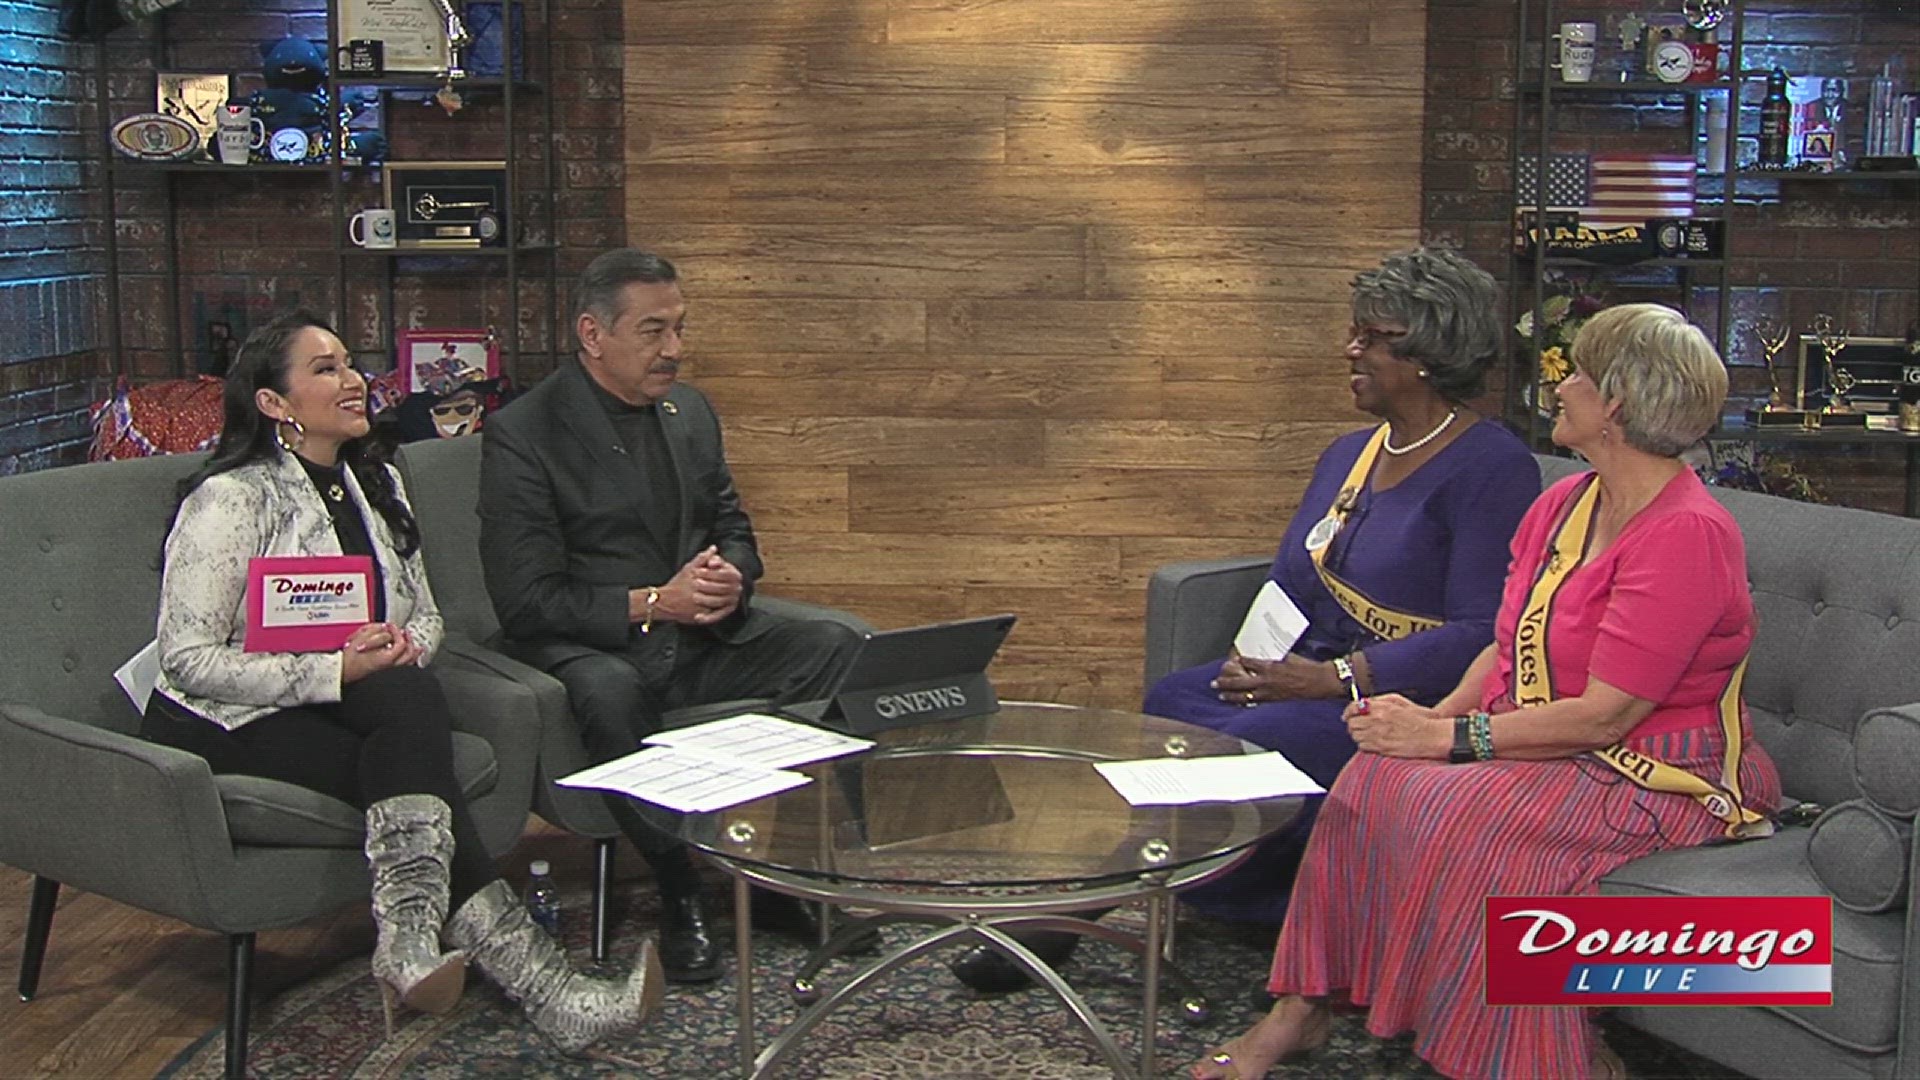 Alice Upshaw Hawkins and Sylvia Campos joined us on Domingo Live to encourage English- and Spanish-speaking citizens alike to register to vote by Feb. 5.